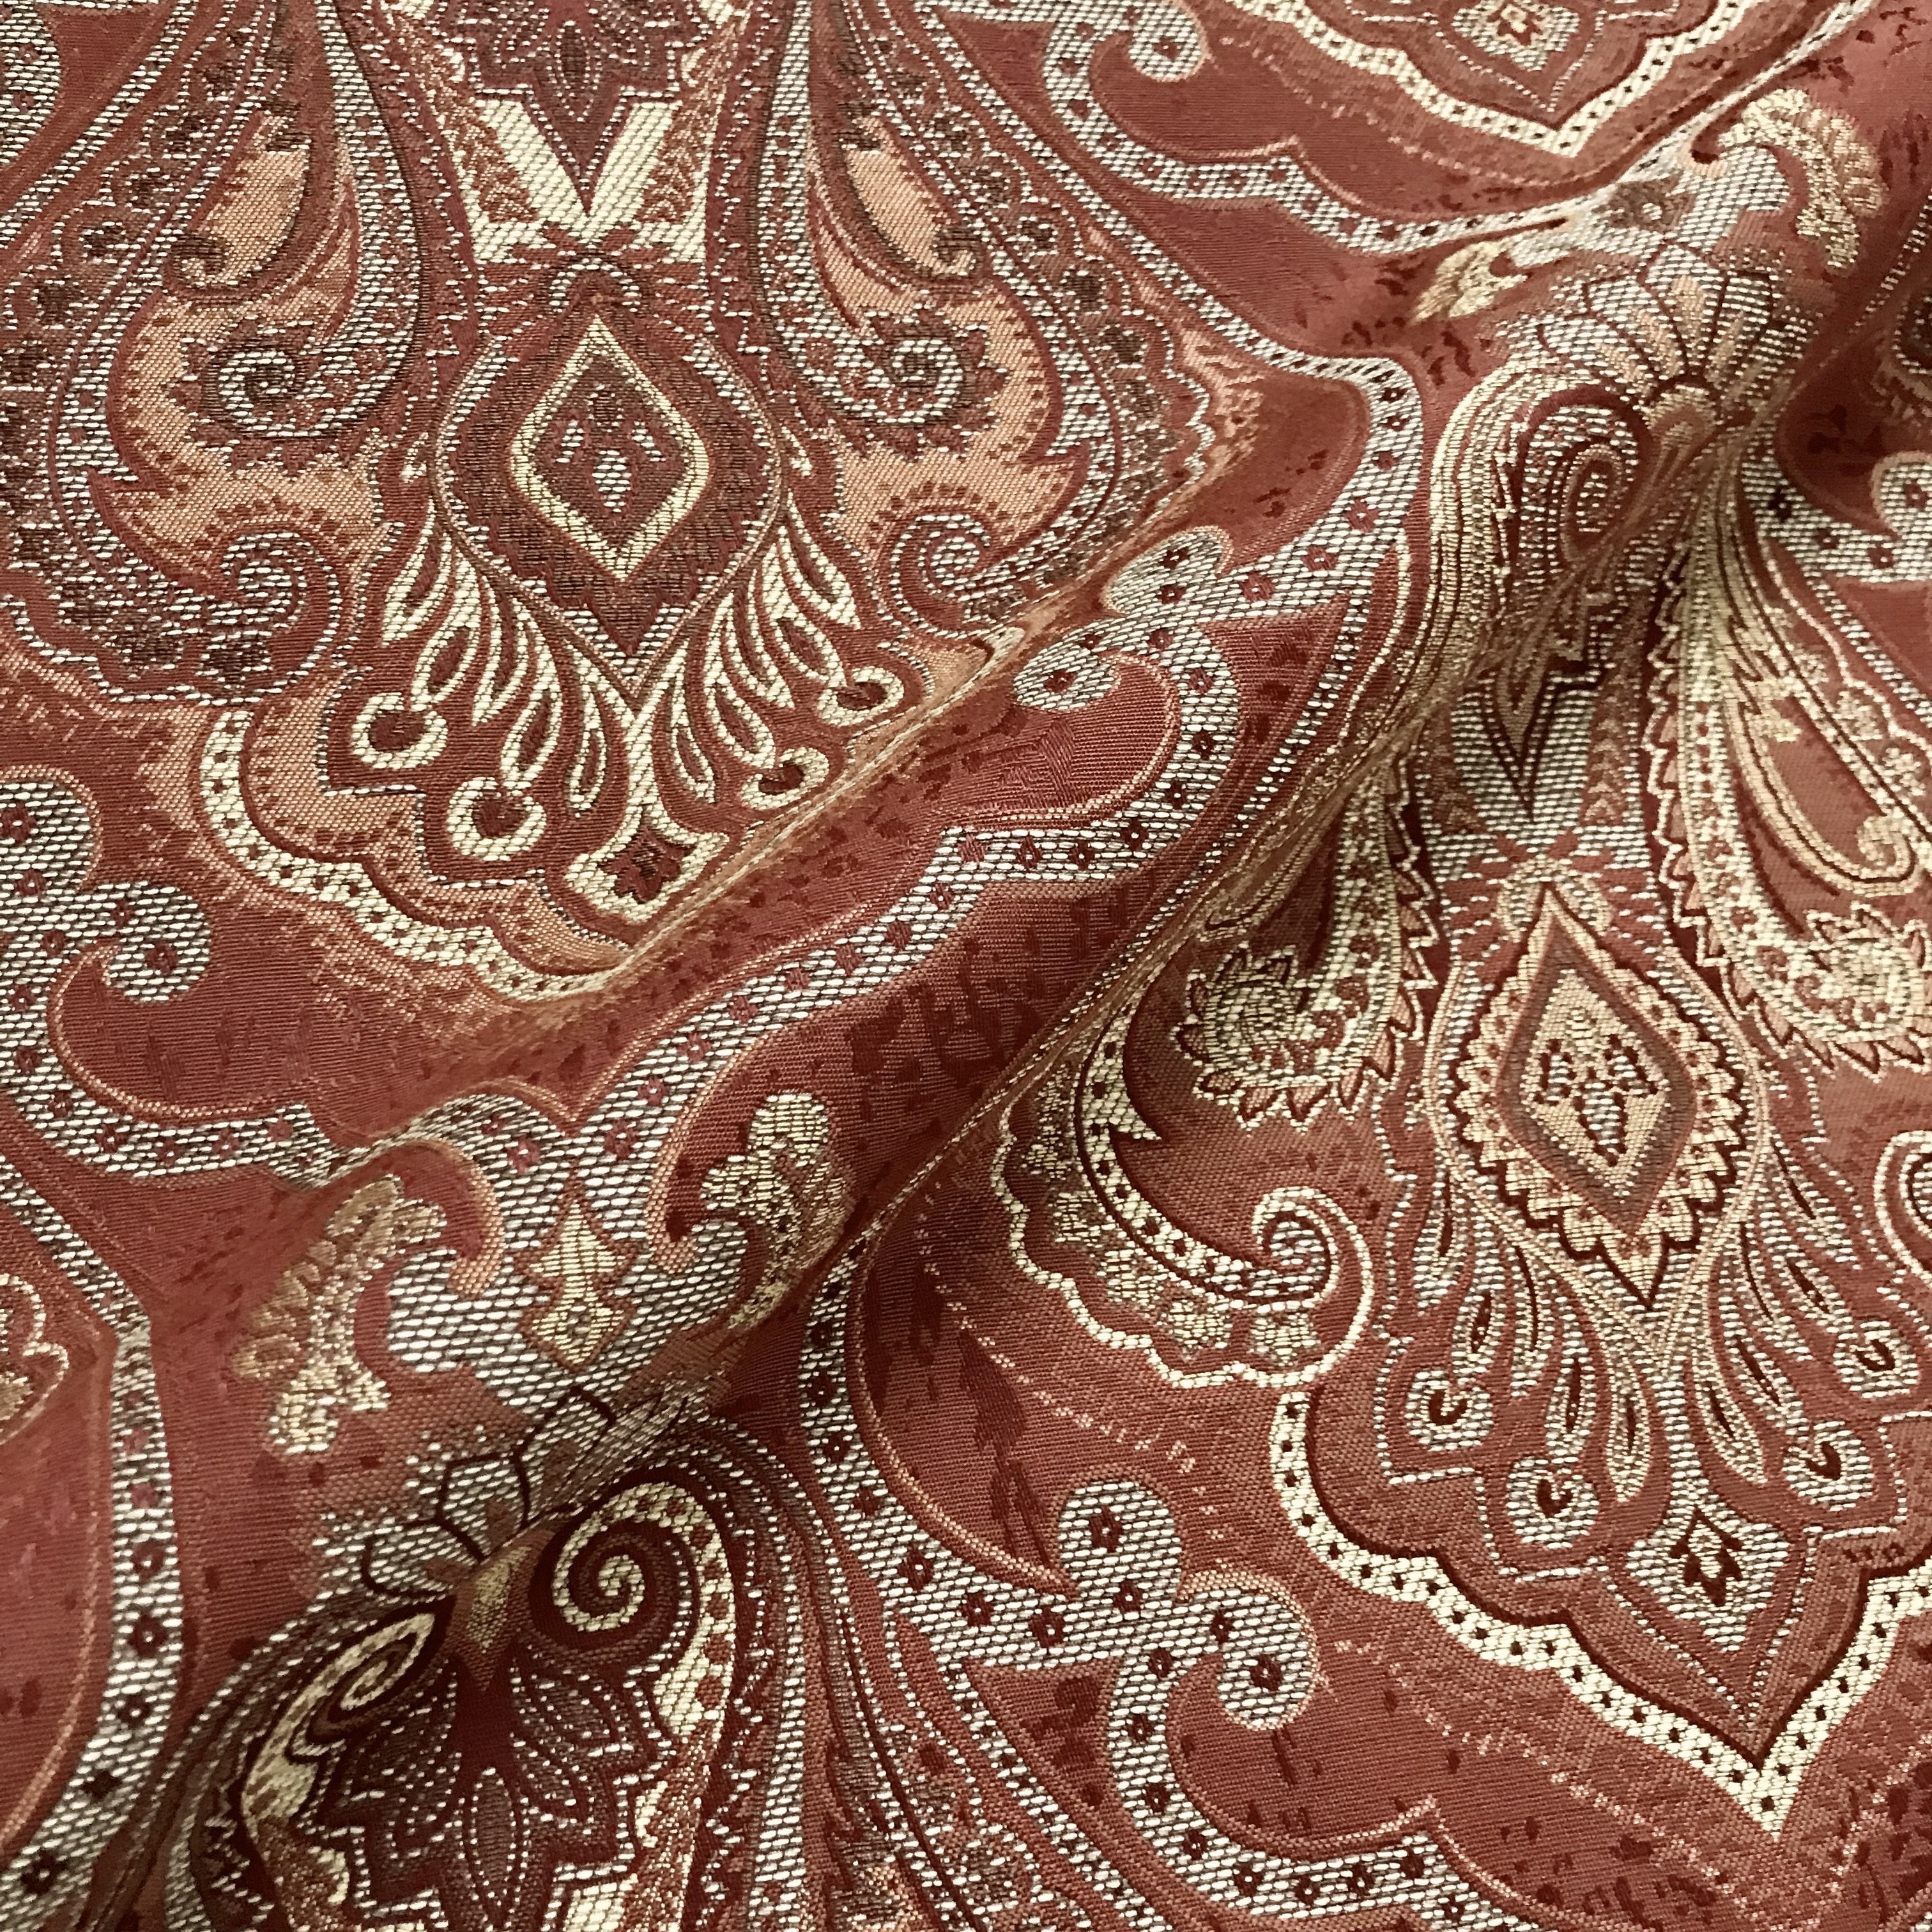 Claret Burgundy Red Damask Jacquard Upholstery Fabric - 54" by the Yard